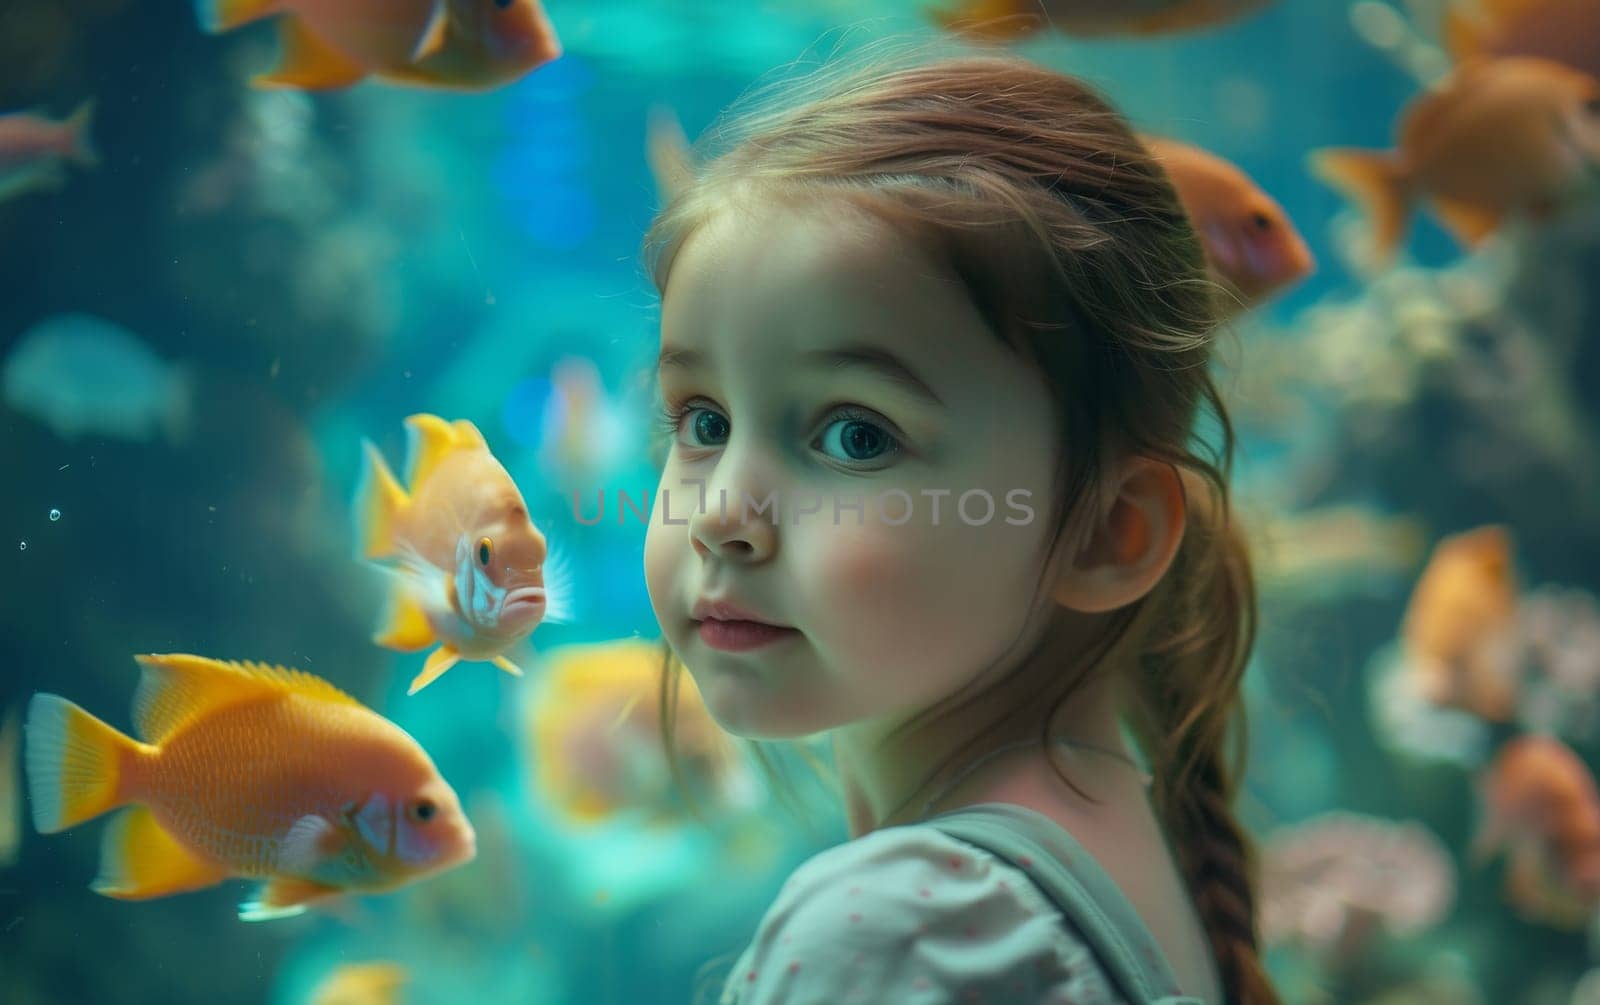 A child girl observing colorful fish and corals in an underwater, dreamlike aquarium setting